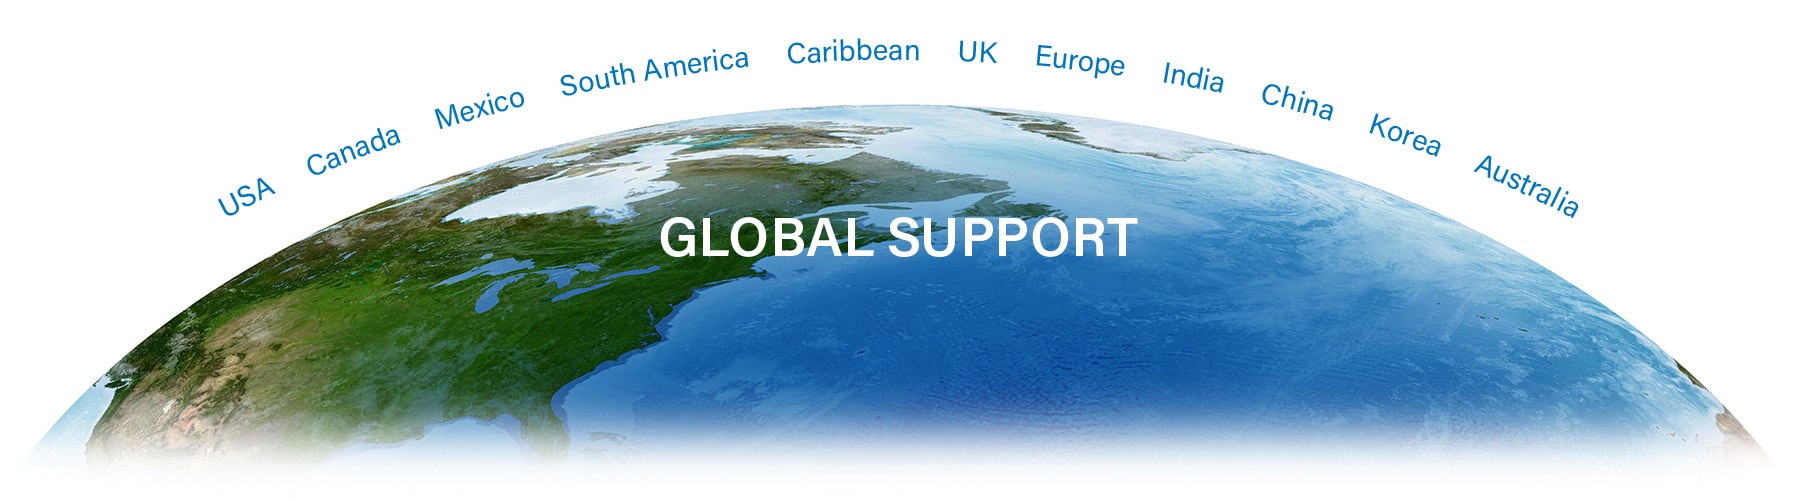 Global support locations around the globe